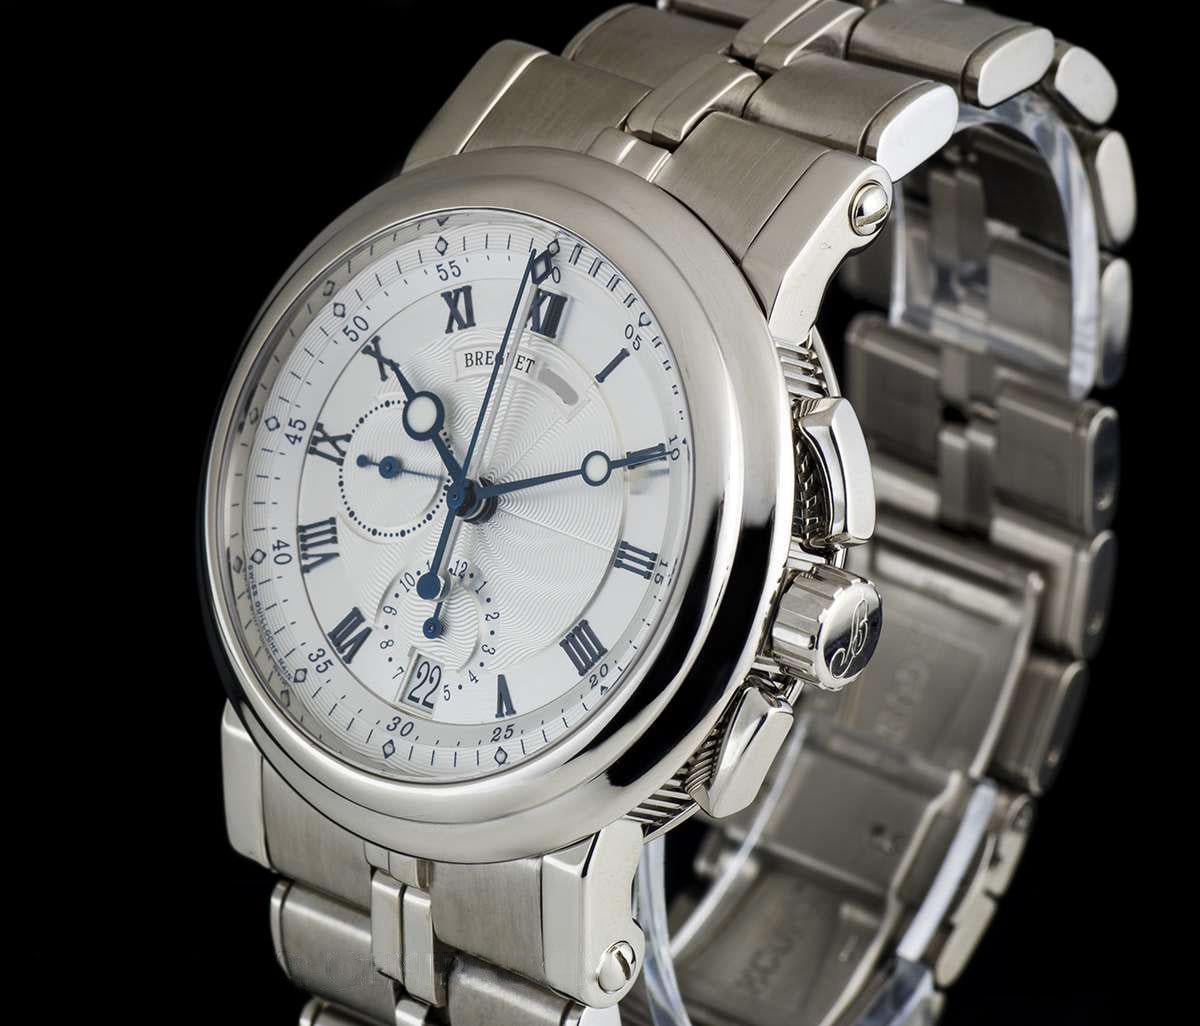 A 42 mm 18k White Gold Marine Chronograph Gents Wristwatch, silver dial hand engraved on a rose engine with roman numerals, date and 12 hour recorder at 6 0'clock, small seconds at 9 0'clock, central seconds counter (blued hand) and central minute